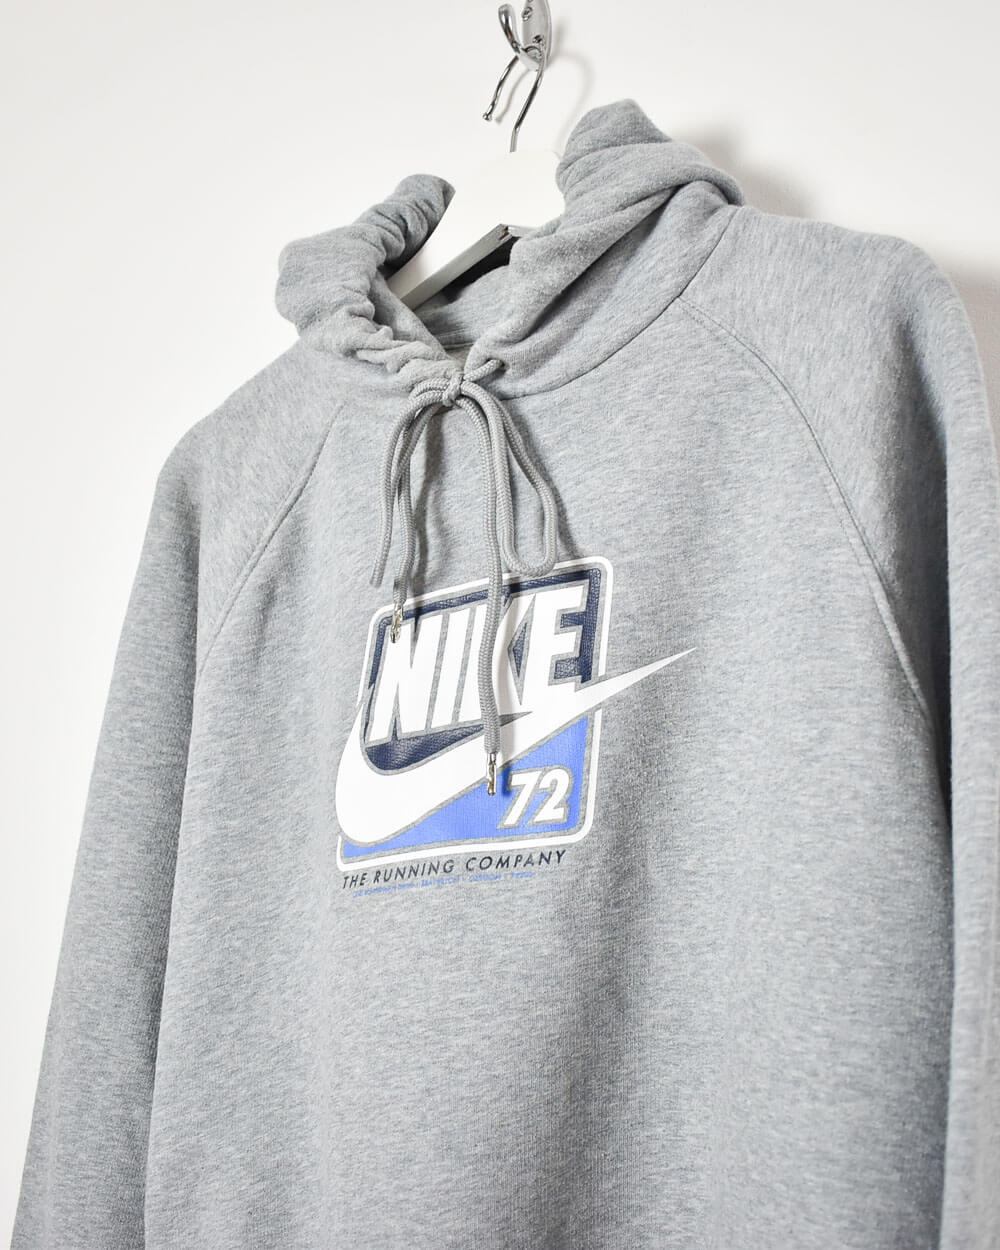 Nike 72 The Running Company Hoodie - Medium - Domno Vintage 90s, 80s, 00s Retro and Vintage Clothing 